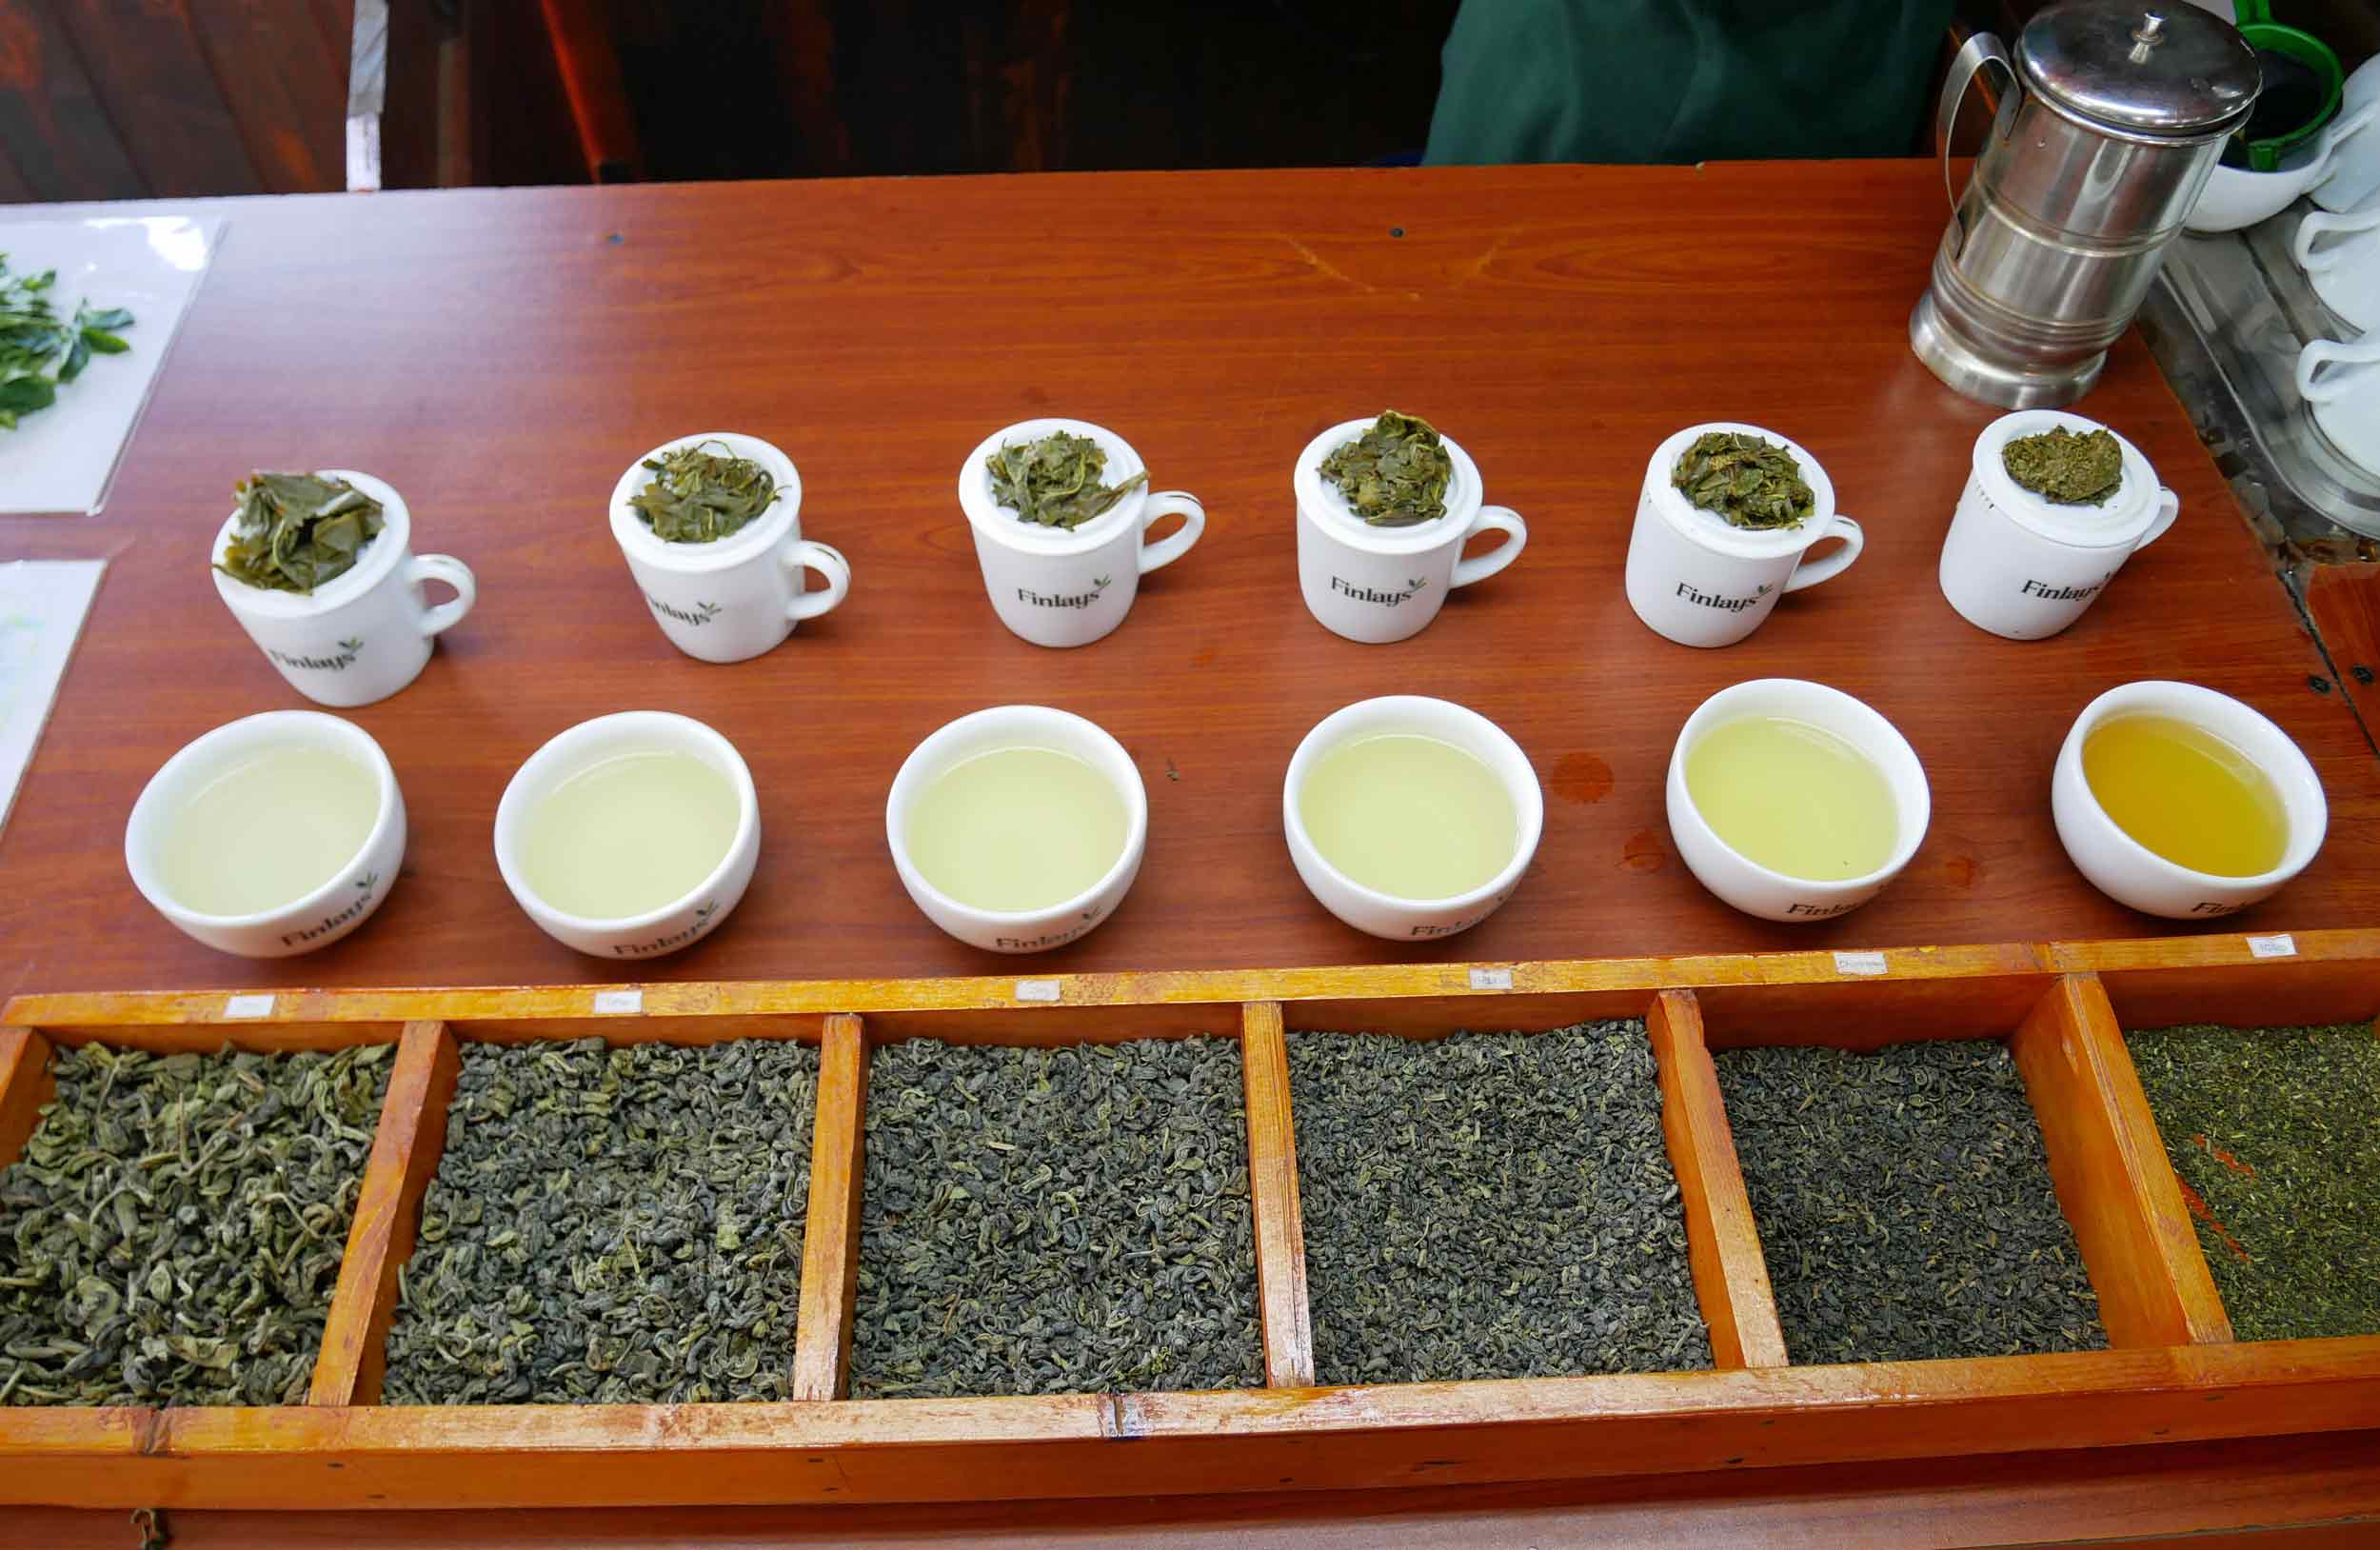  Heaven!&nbsp;Green tea in every shade! While in Ella we visited two tea factories (no photos allowed!) – black tea at Uva Halpewatte and this Green tea factory at Newburgh. 